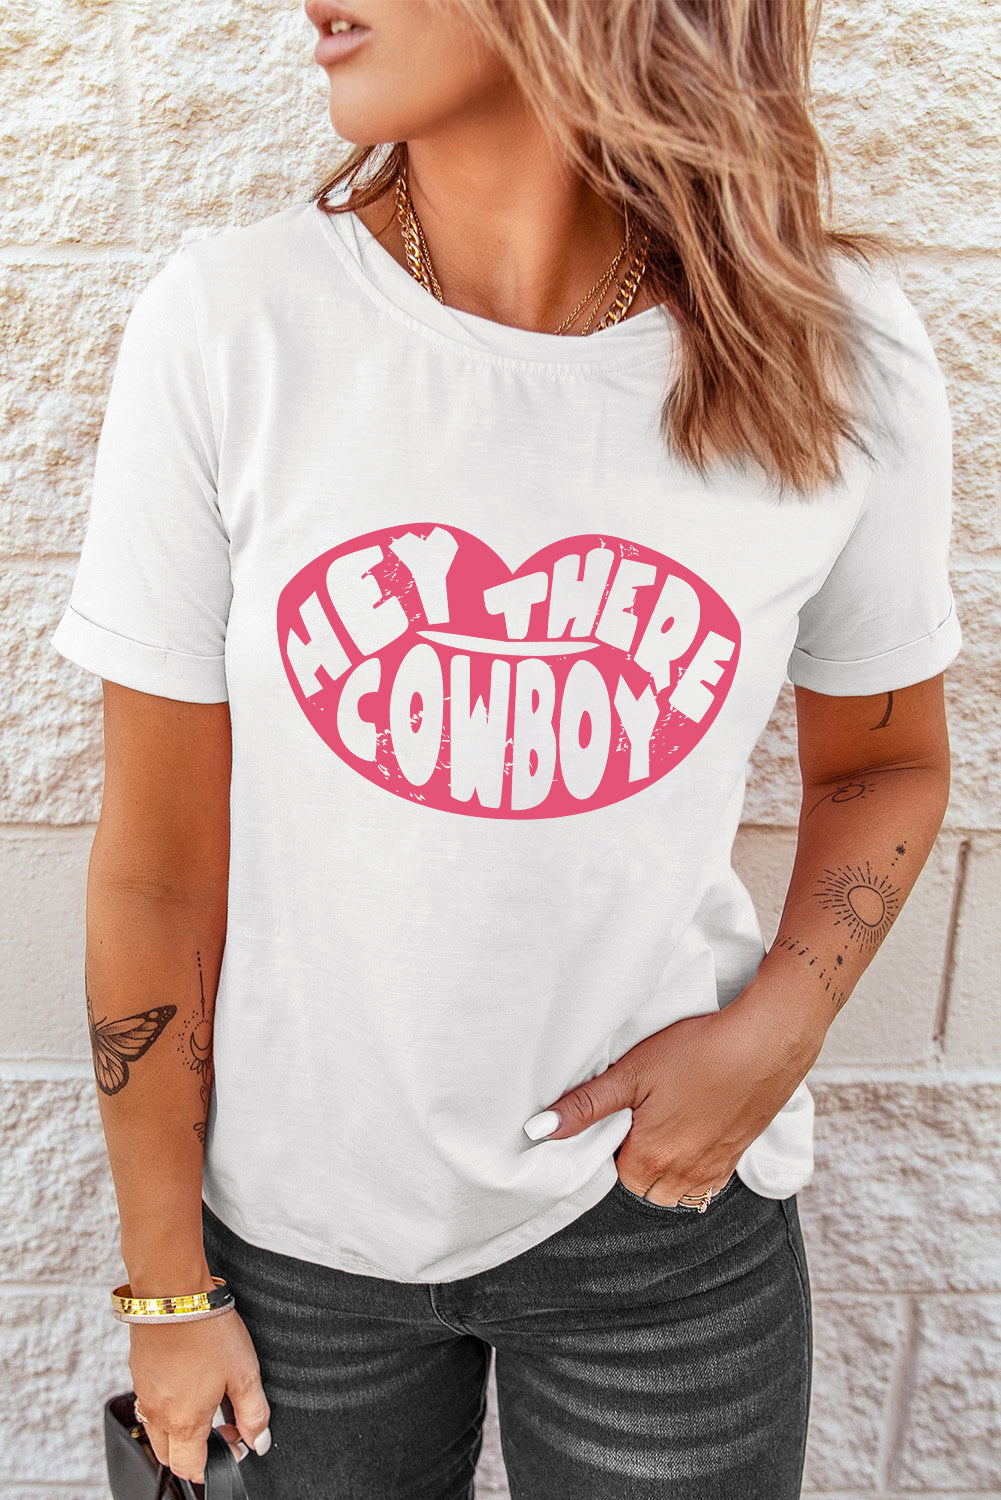 HEY THERE COWBOY Graphic Tee